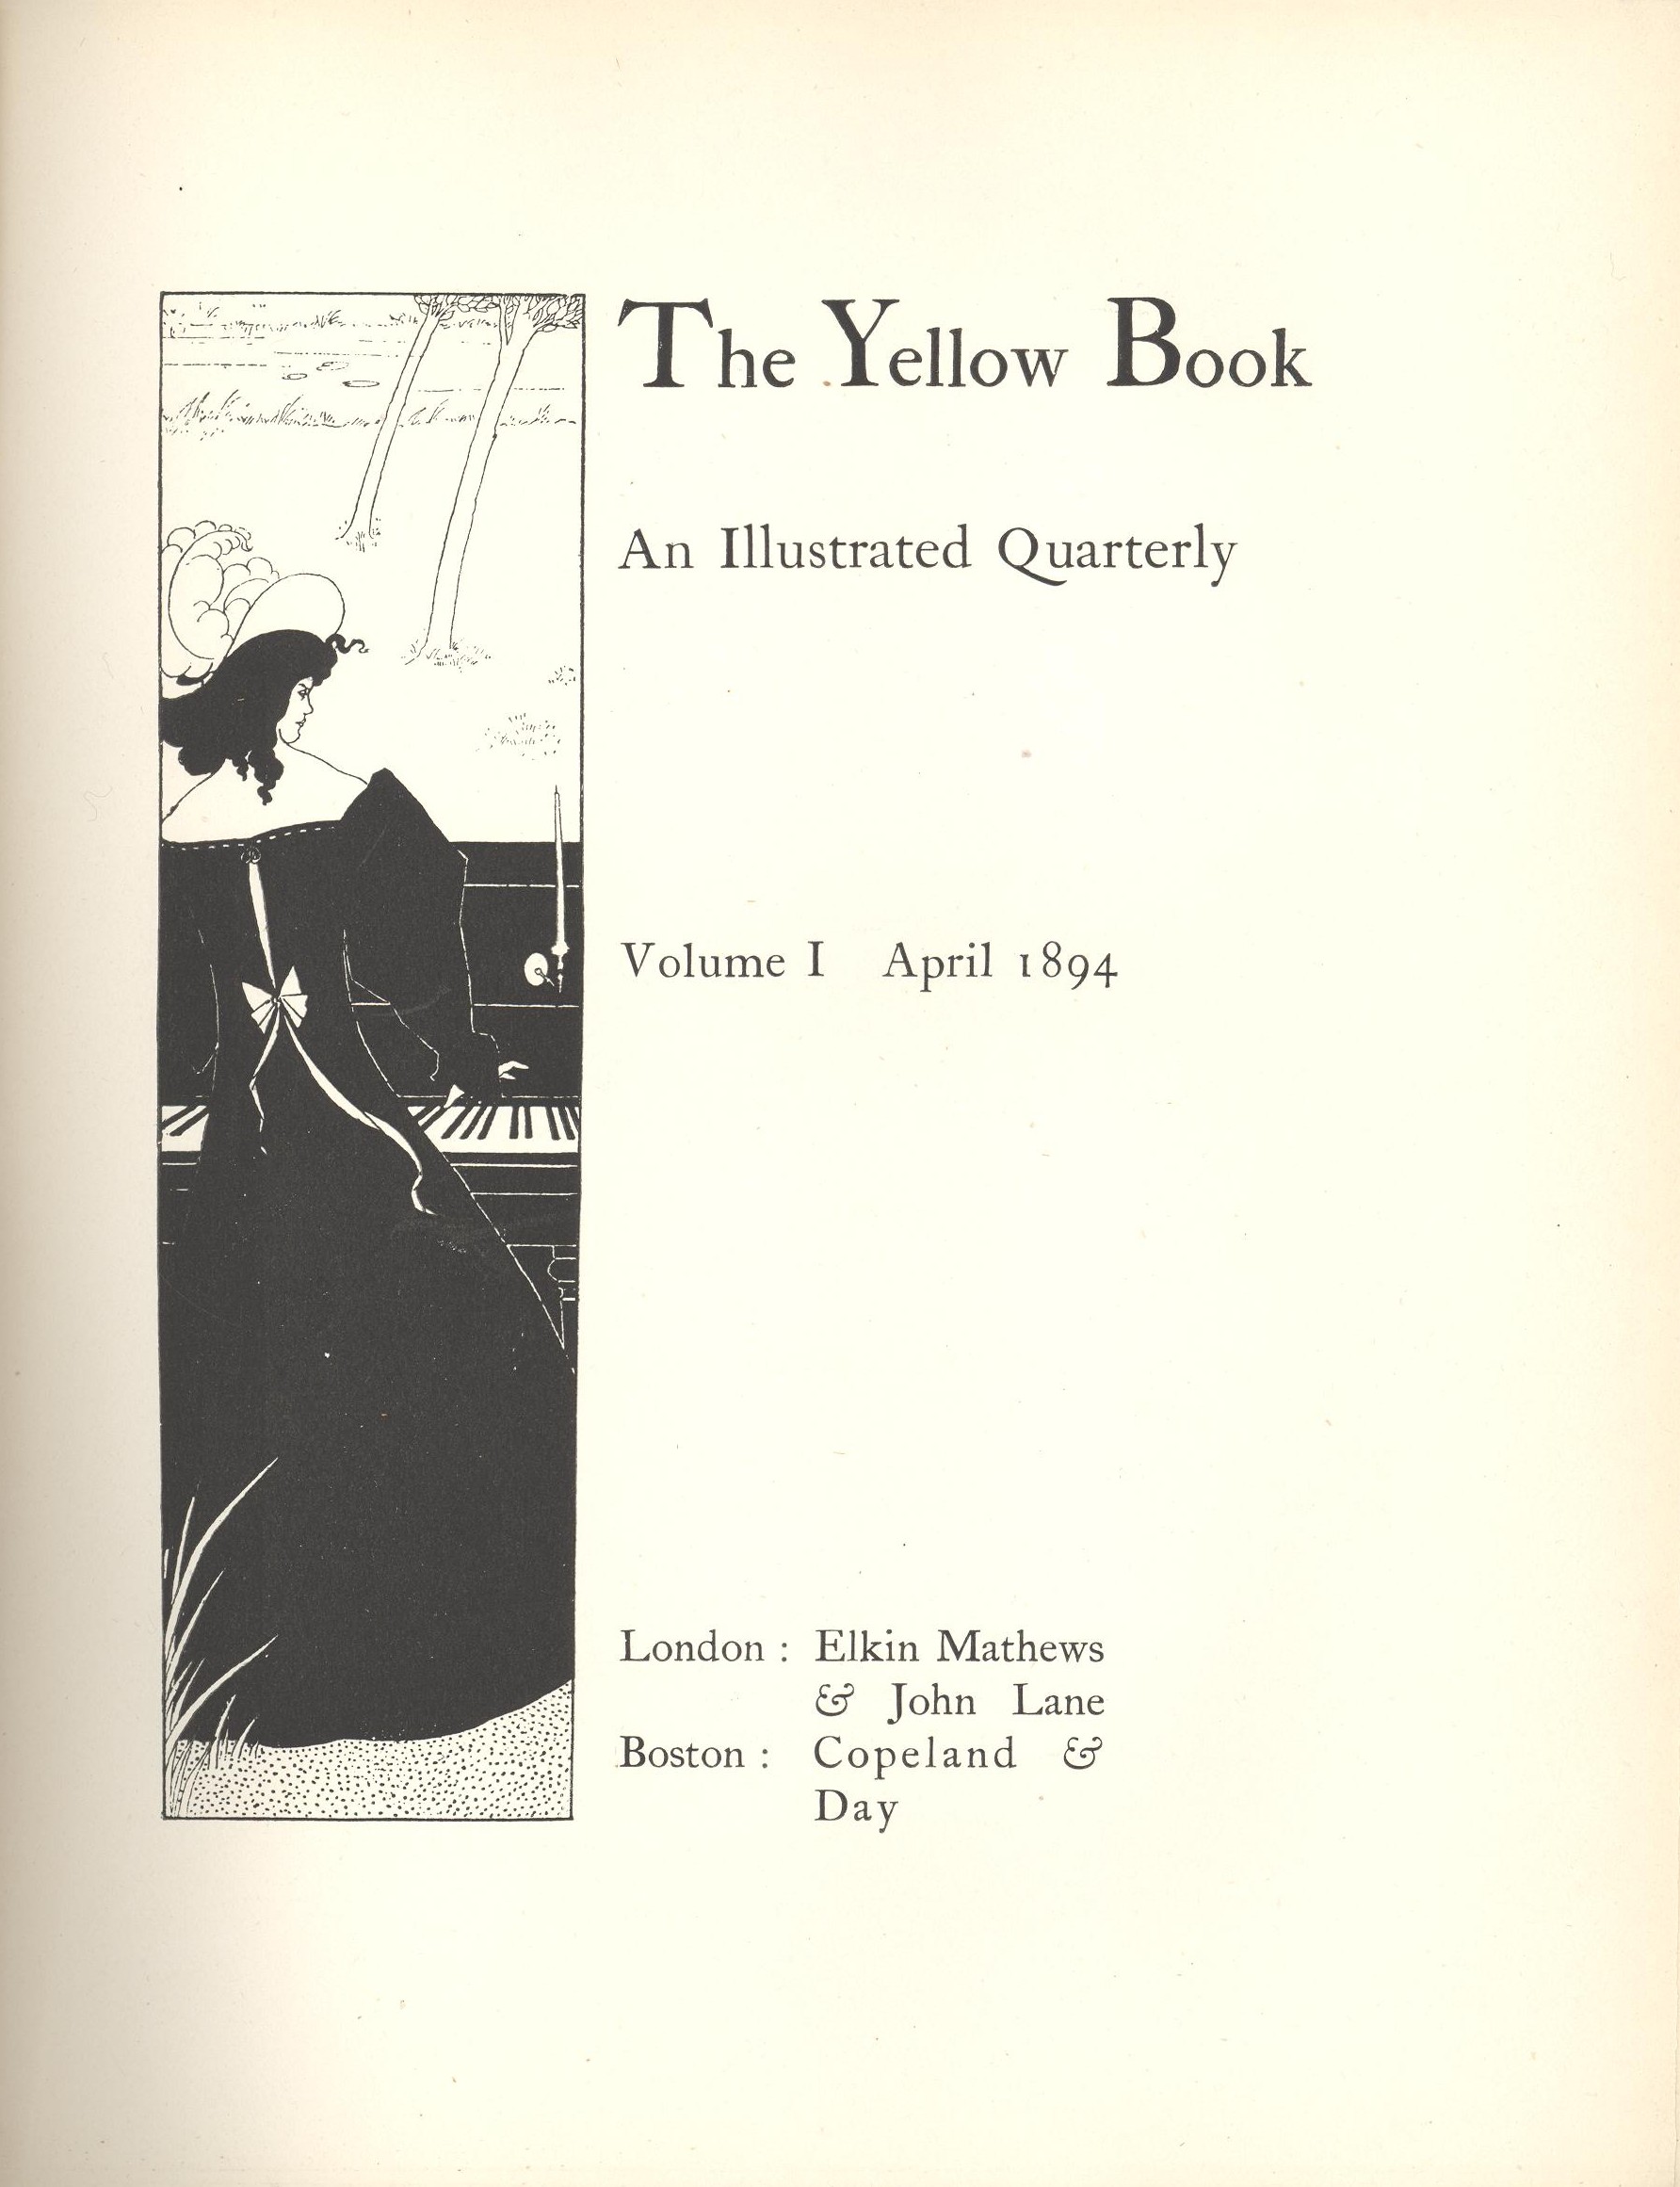 Image is in vertical frame on extreme left facing letterpress The letterpress reads The Yellow Book An Illustrated Quarterly Volume I April 1894 London Elkin Matthews & John Lane Boston Copeland & Day The image shows the back view of a woman with her face in profile She is shown full length wearing a long black dress and white feathered hat playing a piano lit by tapers outside The piano divides the image in half horizontally The lower half of the image is comprised of the piano keys and her dress The upper half of the image has two windswept trees in the middle ground and a river in background The image is vertically displayed